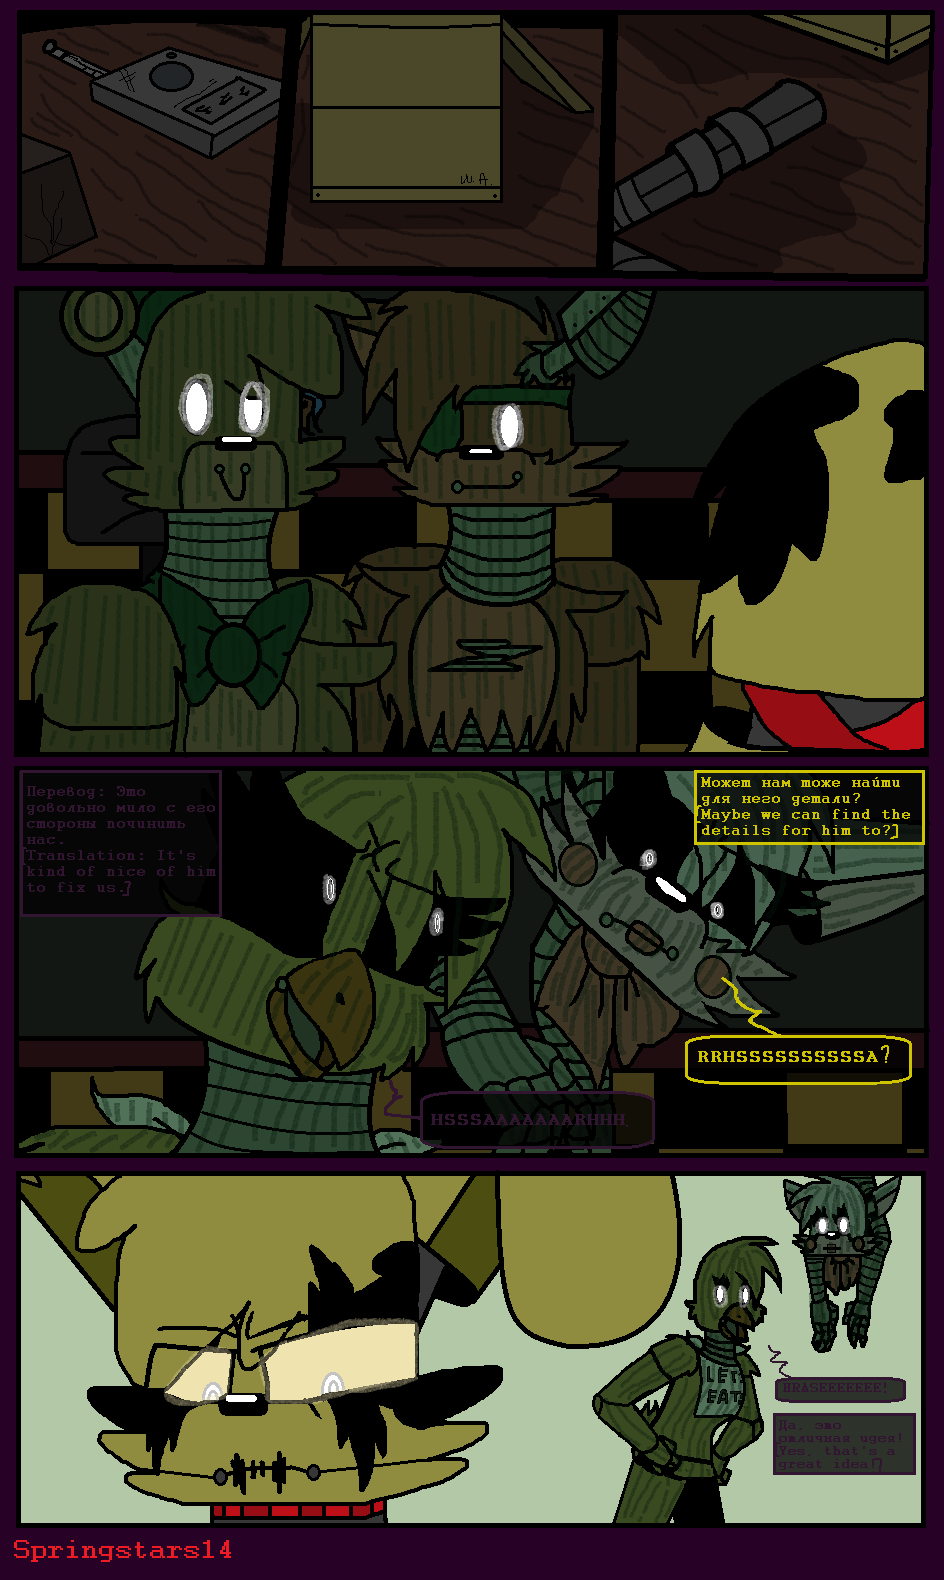 Five Nights at Freddy's 3, Comic Book